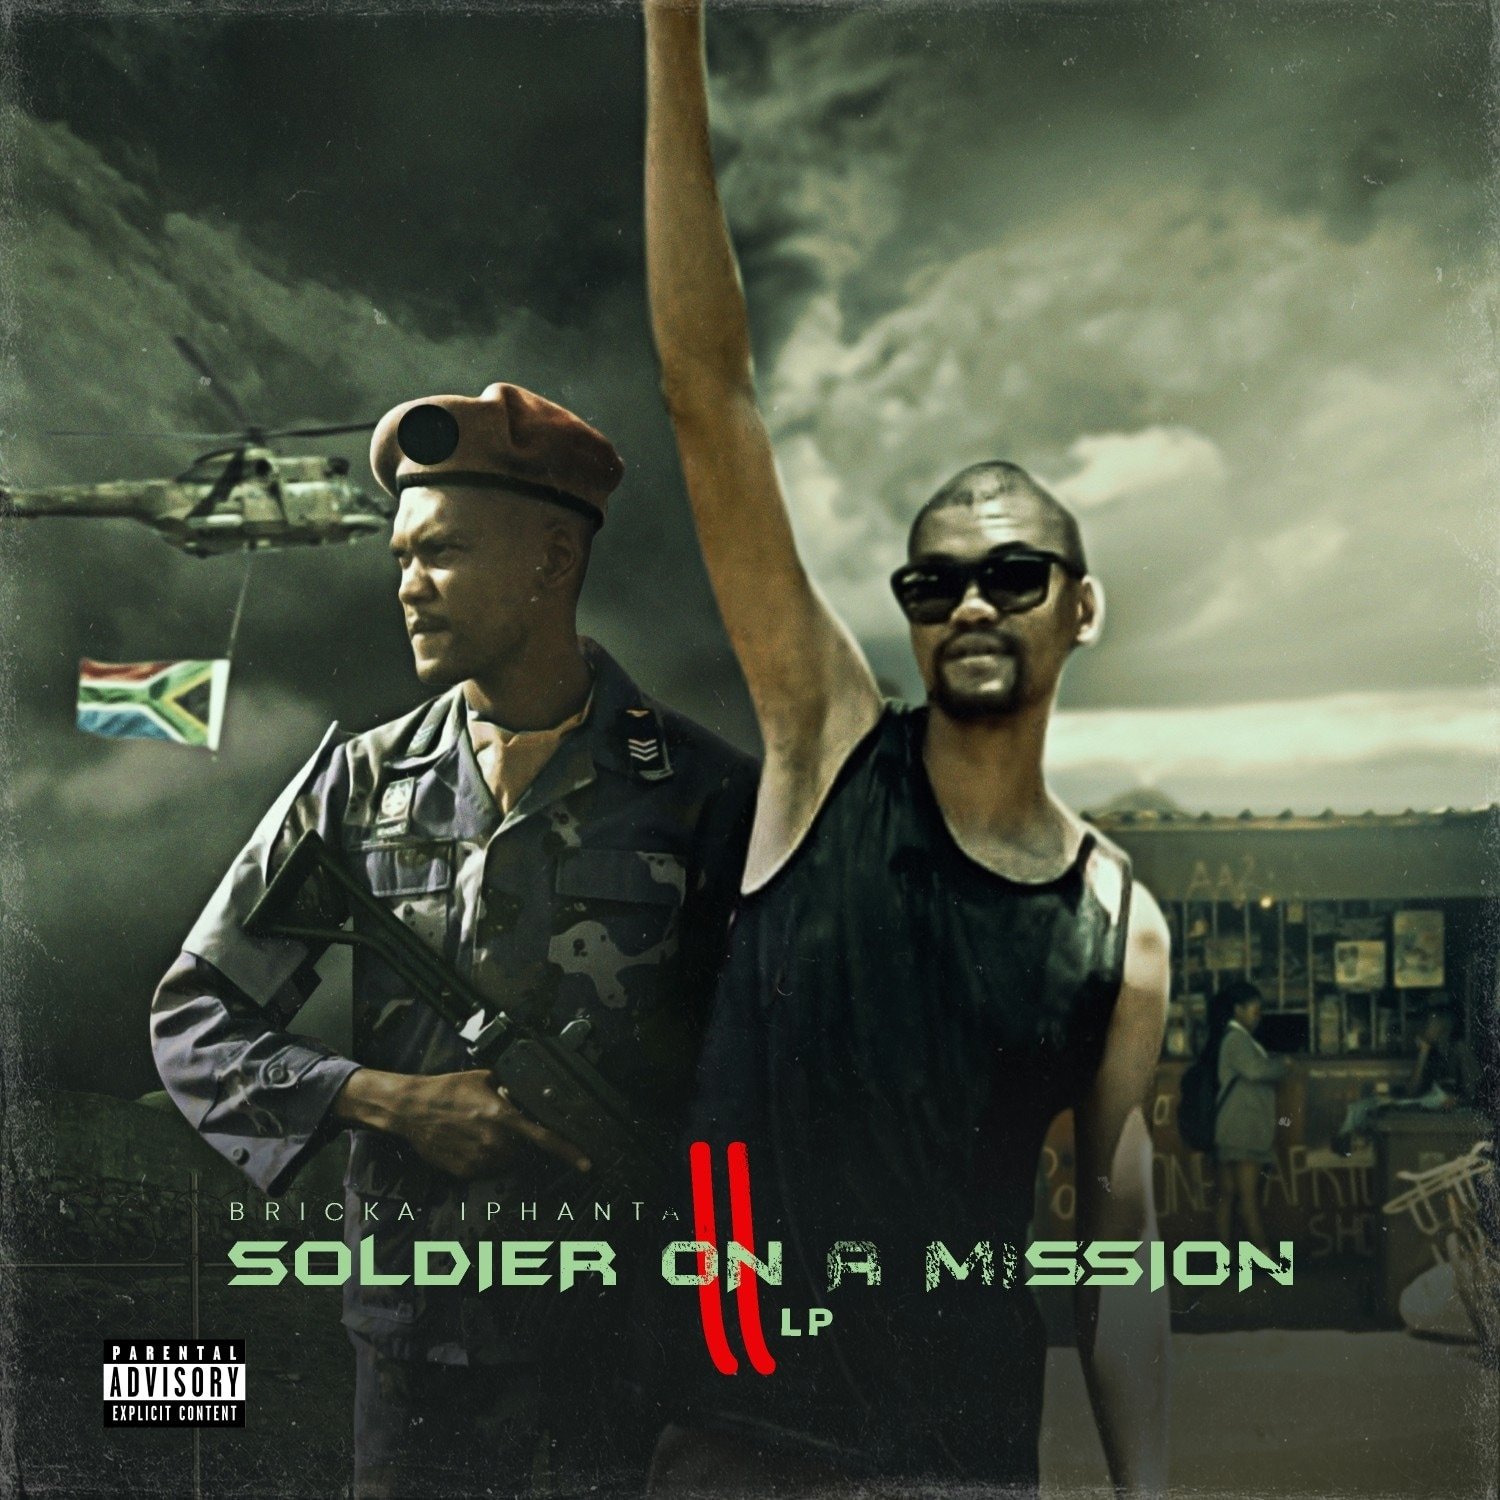 Military Rapper Bricka Iphanta Reveals Highly Anticipated Album "Soldier On A Mission 2.0"